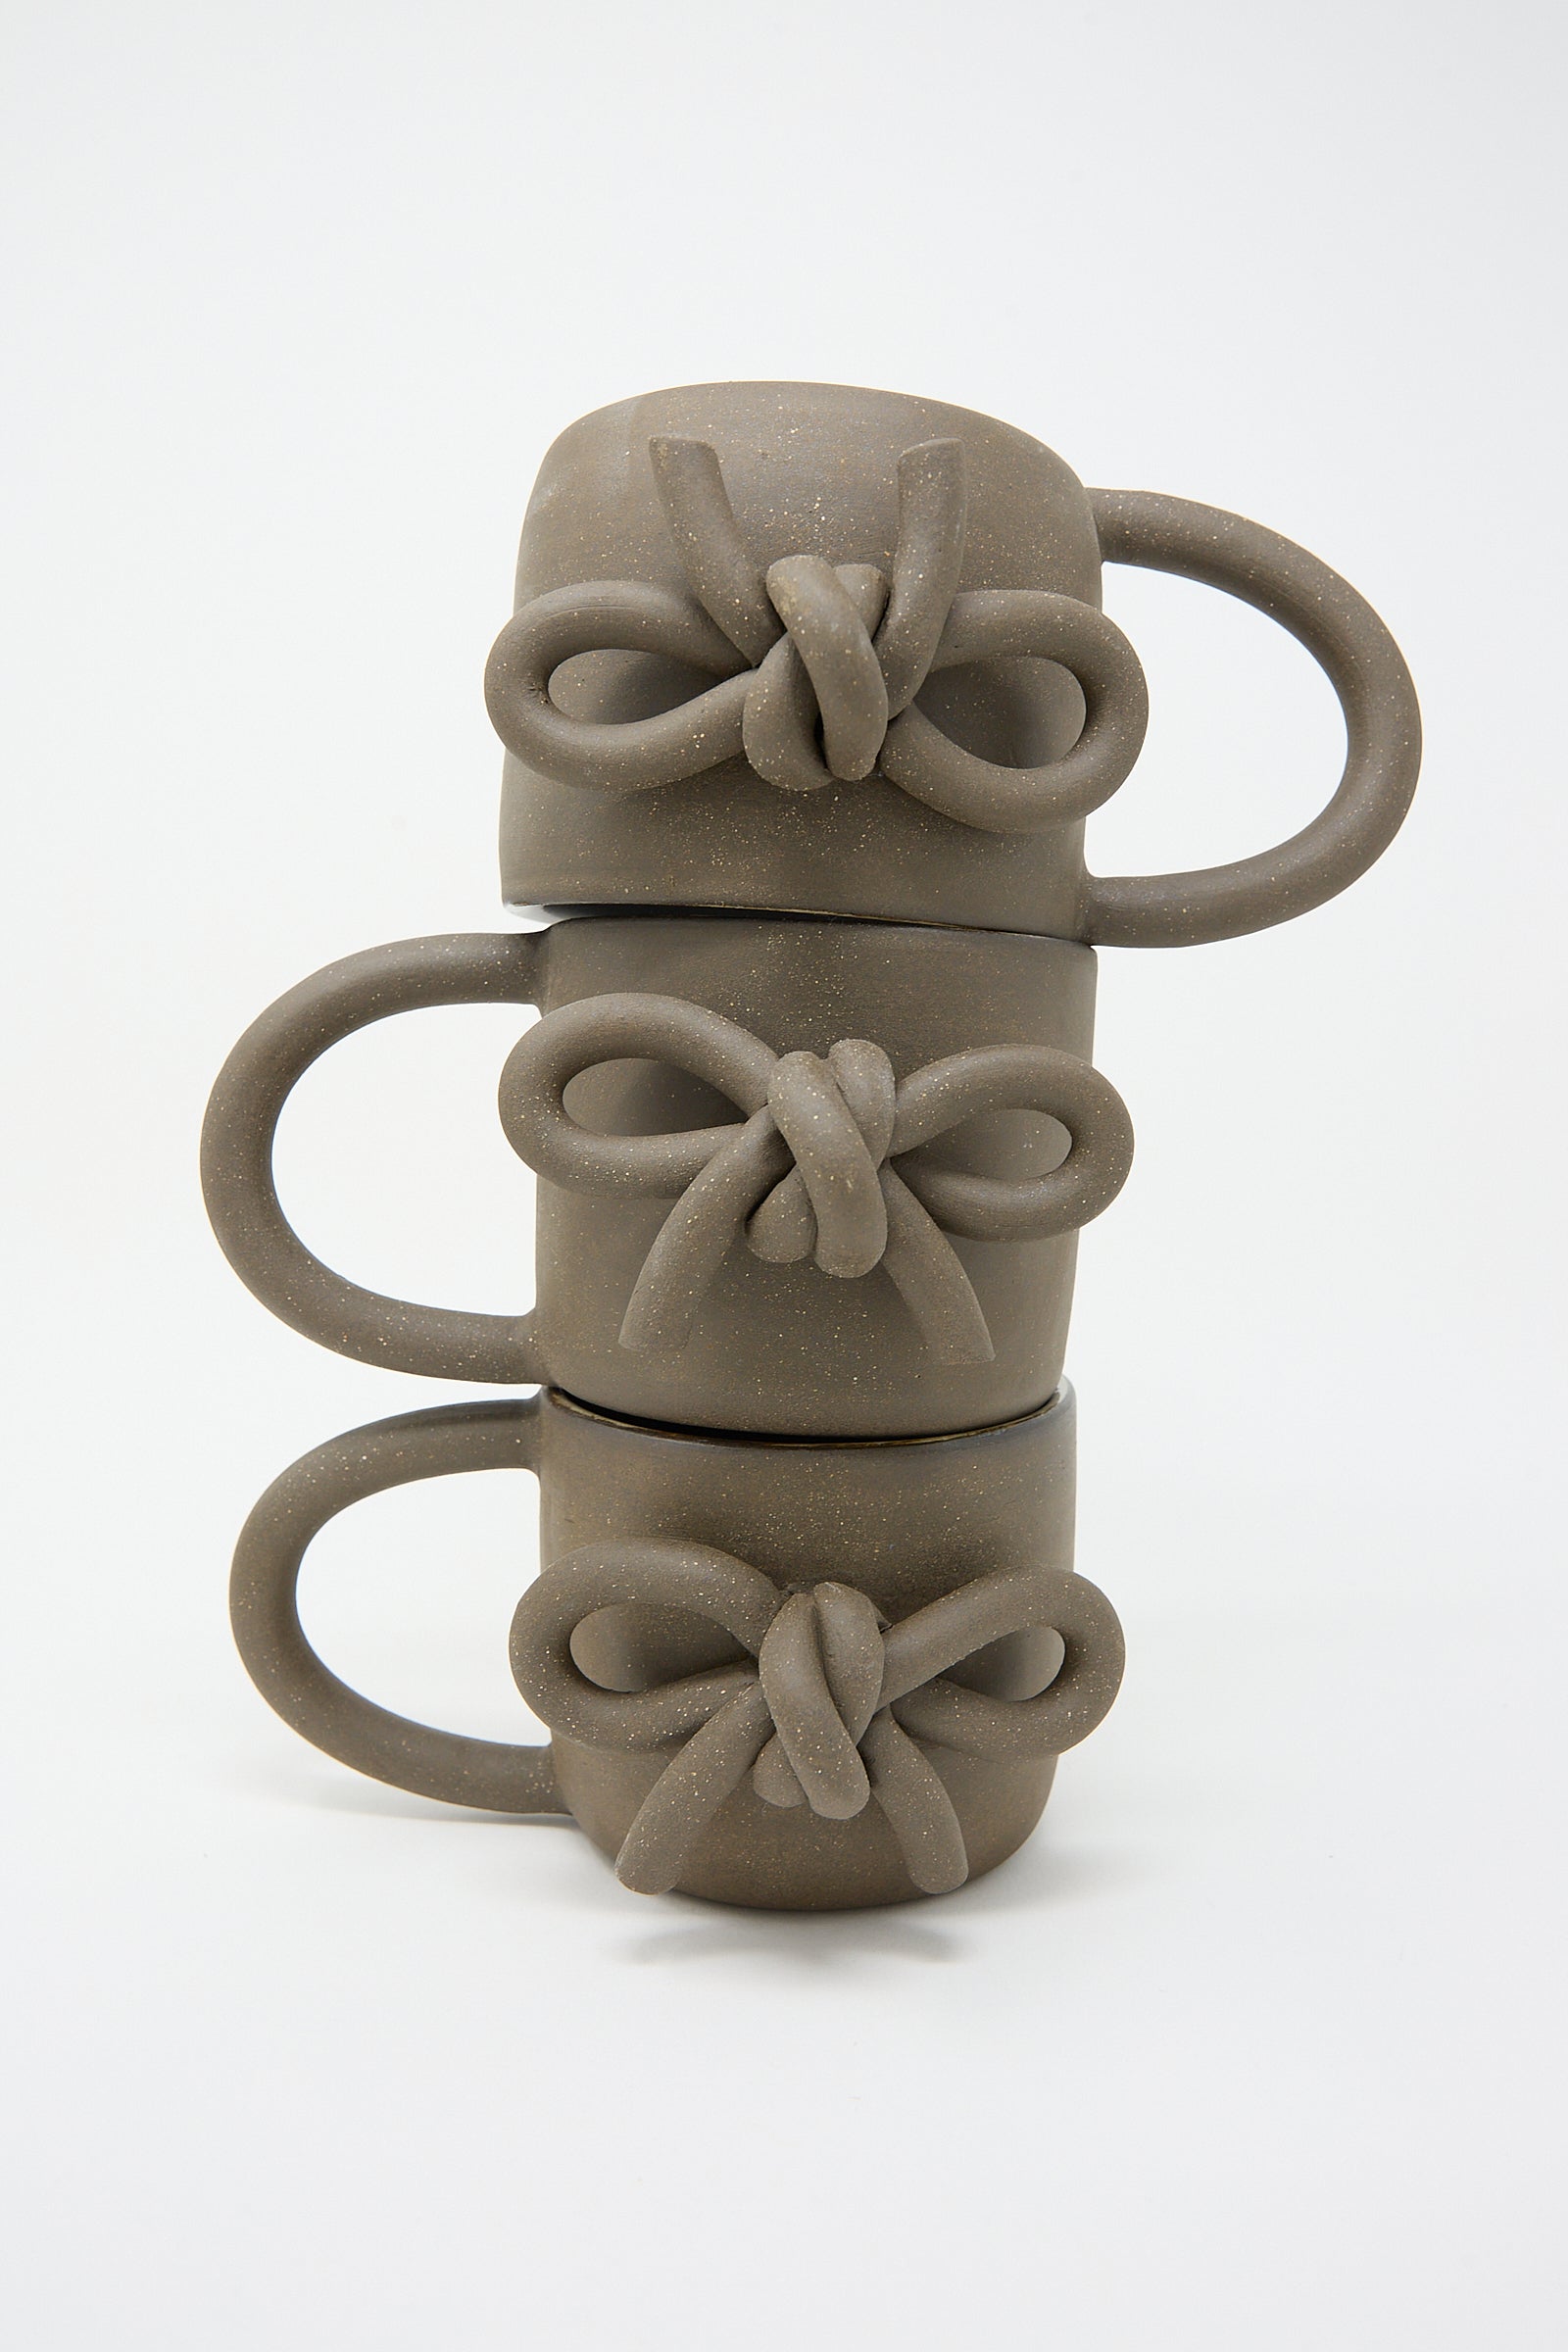 Four stacked Lost Quarry hand-formed ceramic mugs in black, each with a decorative bow design on the handle, against a white background.